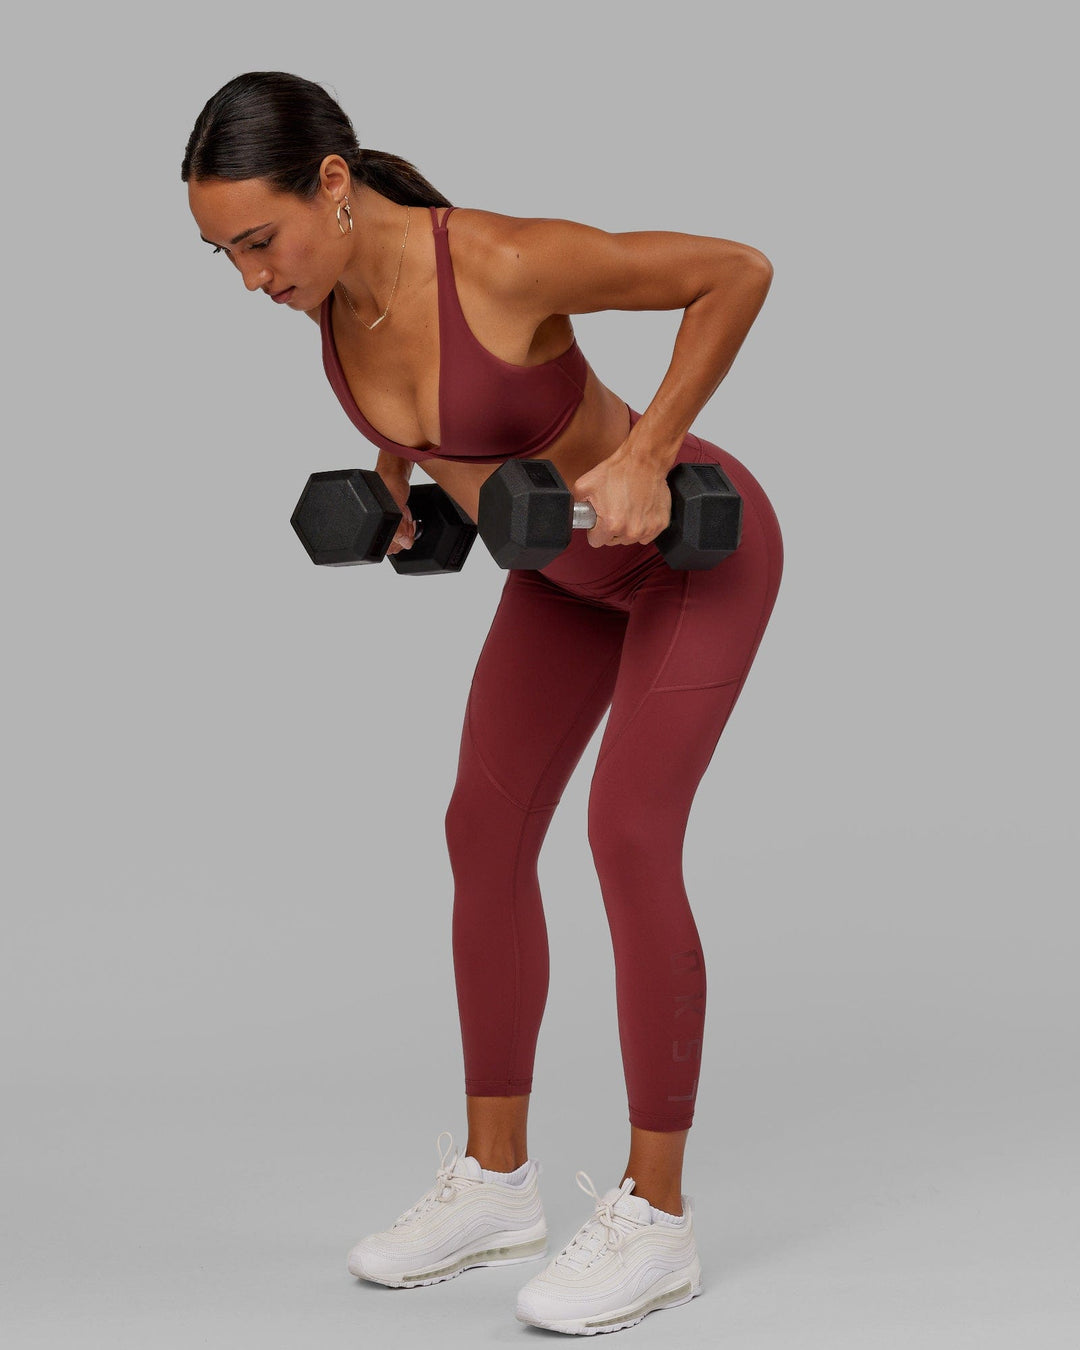 Woman wearing Rep 7/8 Length Tight - Apple Berry